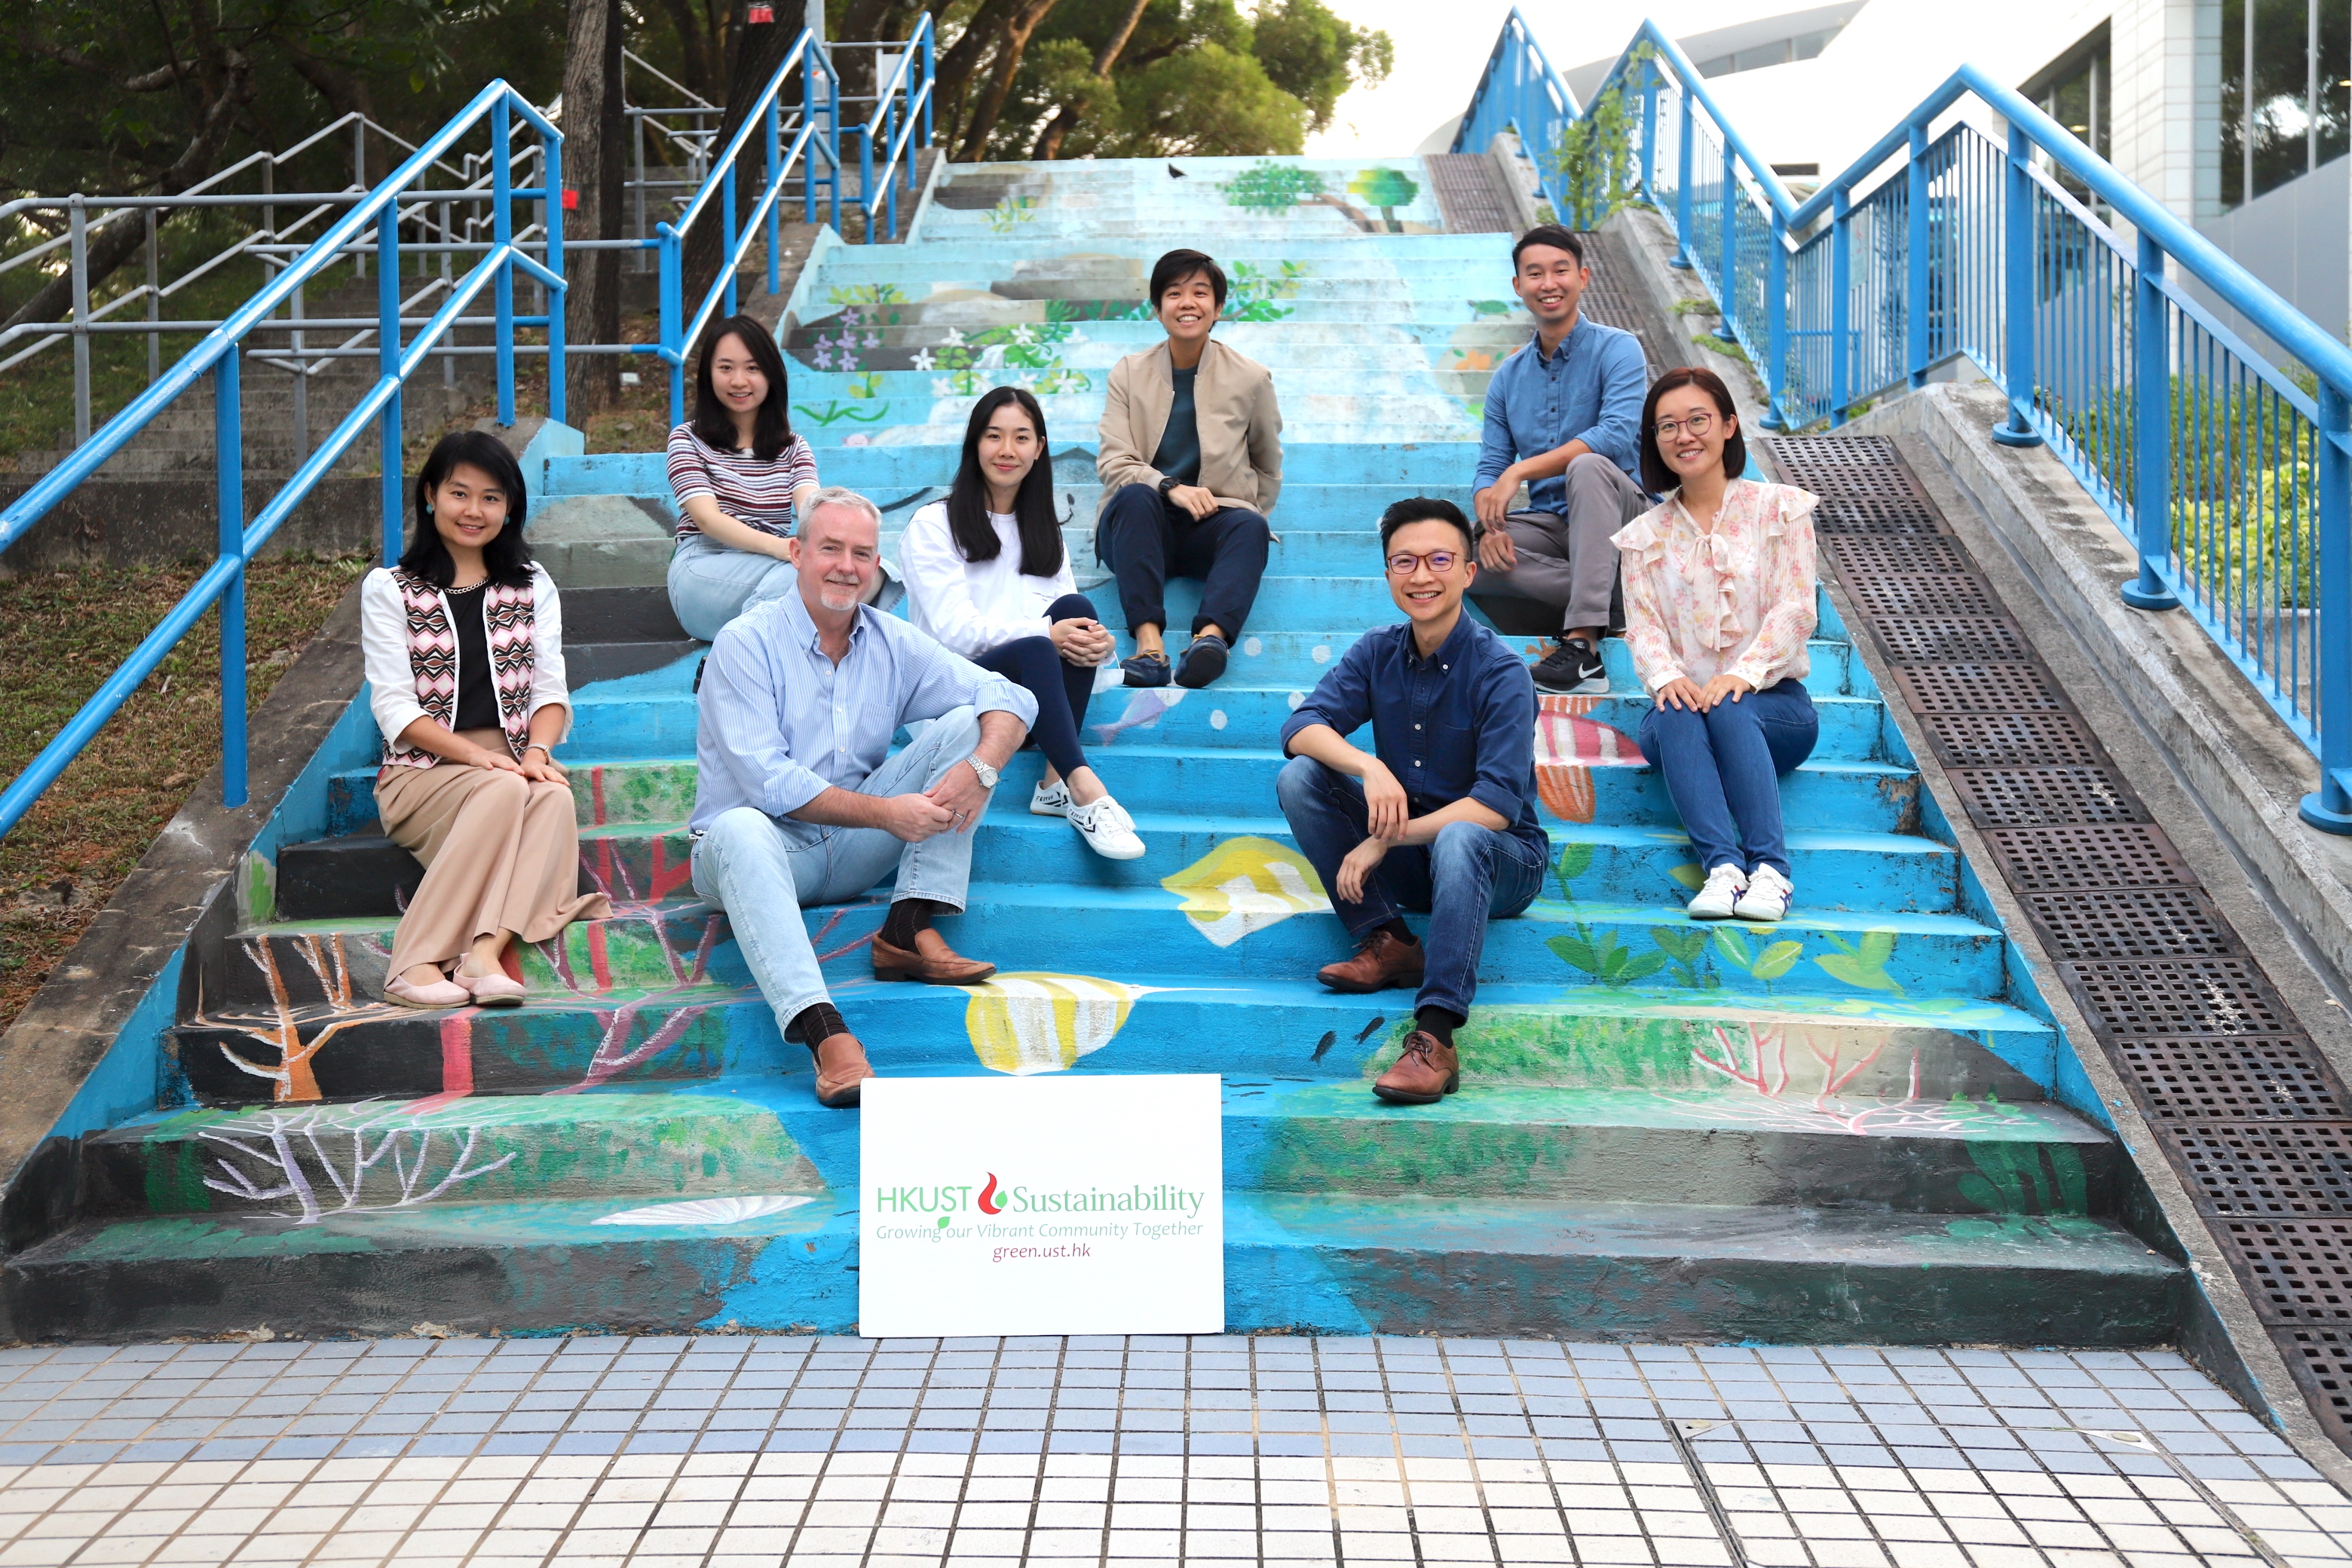 Since its establishment in 2021, the HKUST Sustainability/Net-Zero Office led by Director Mr. Davis BOOKHART (second left, front row) has launched dozens of workshops, campaigns, and co-curricular activities to enhance university members’ awareness of sustainability.